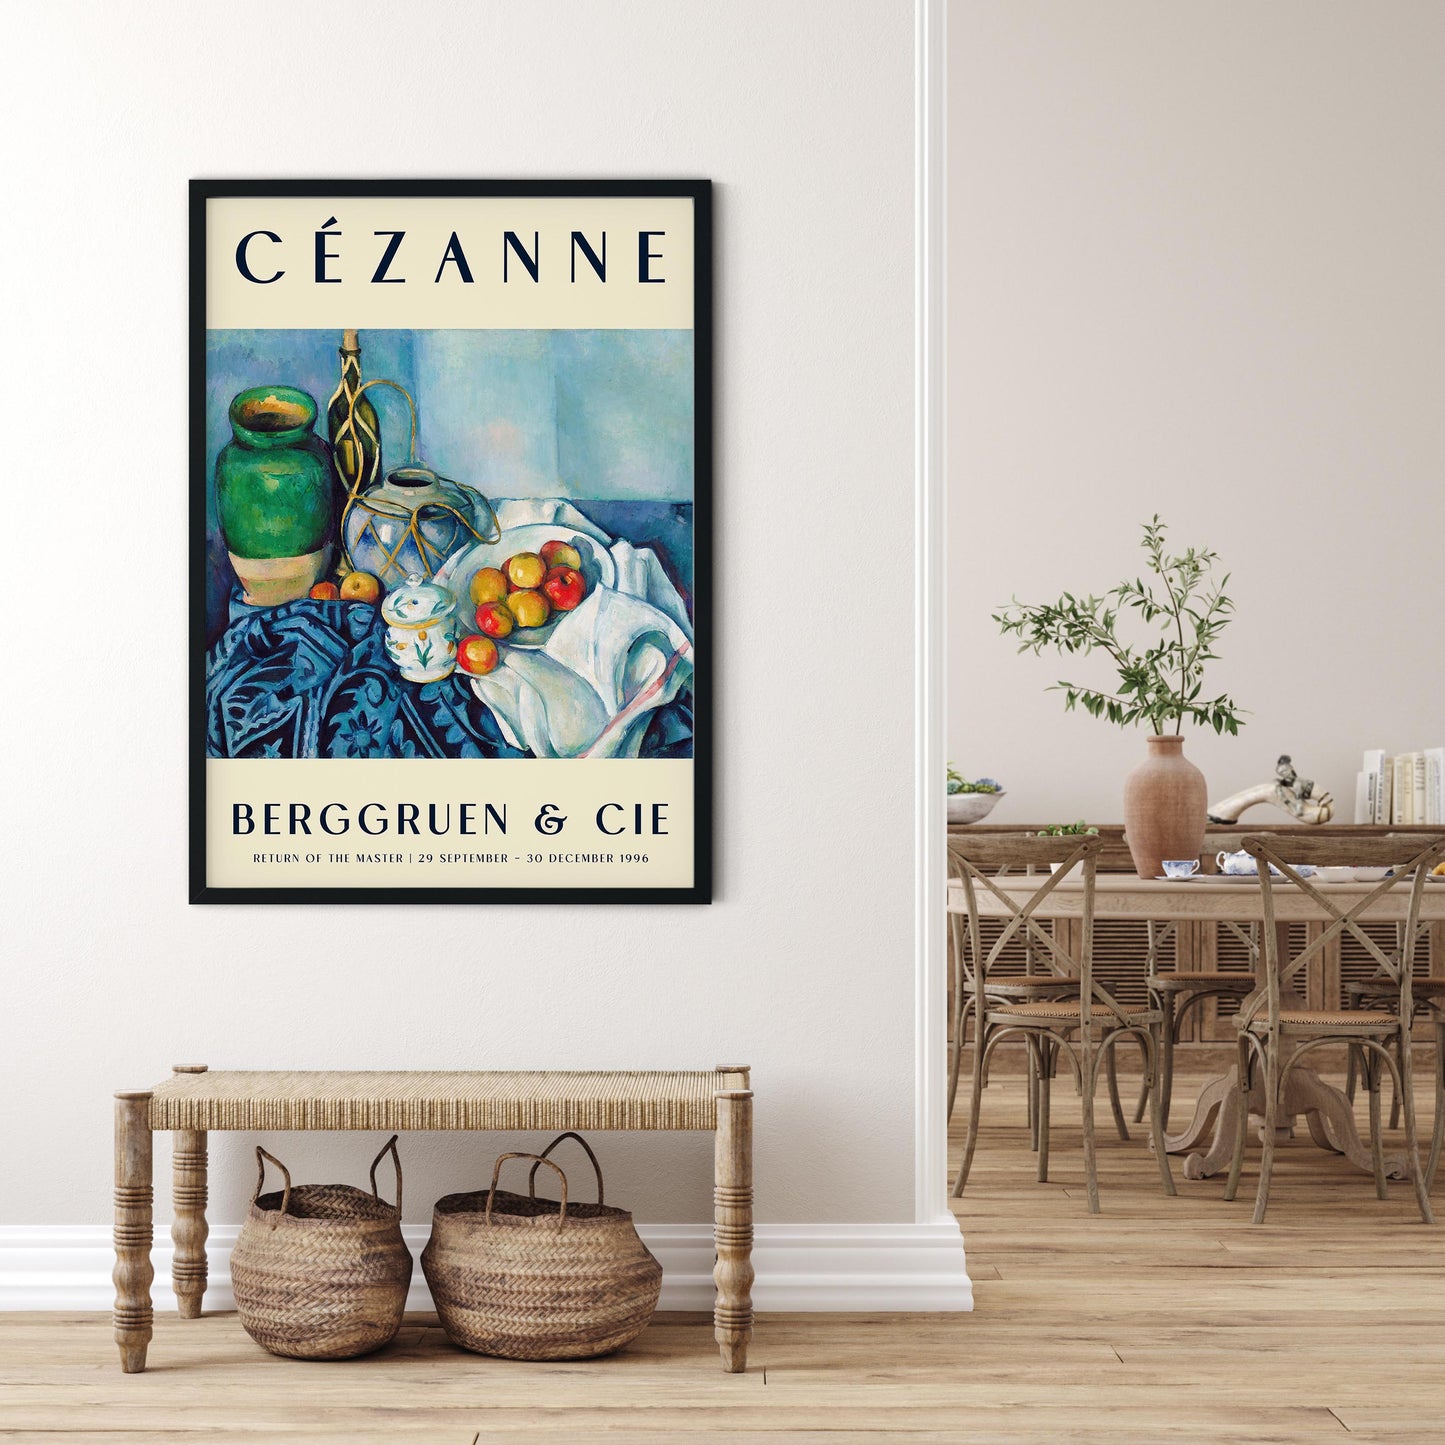 Cézanne Still Life with Apples Art Exhibition Poster